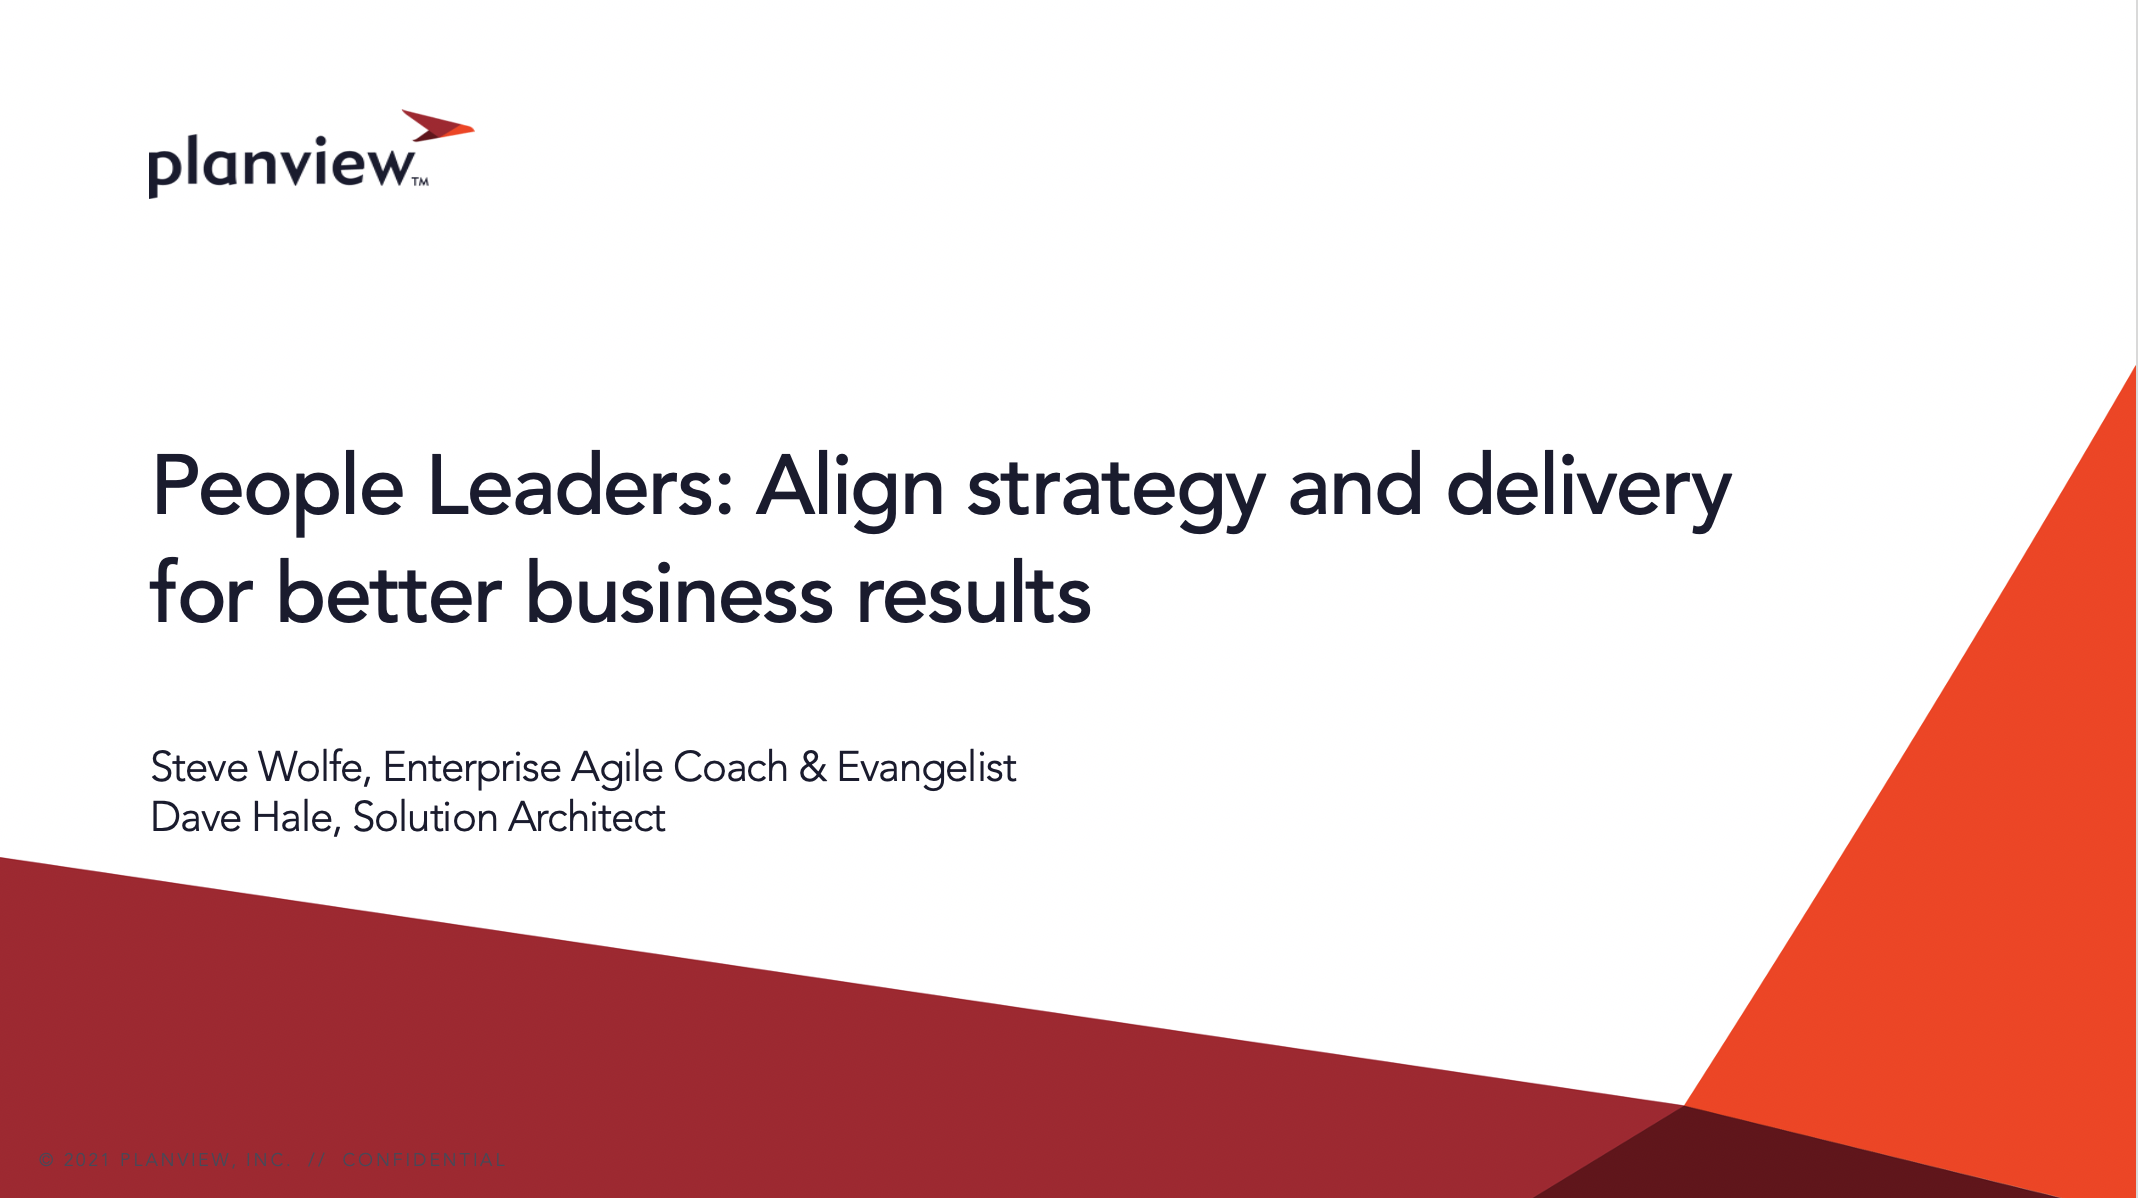 People Leaders: Align strategy and delivery for better business results